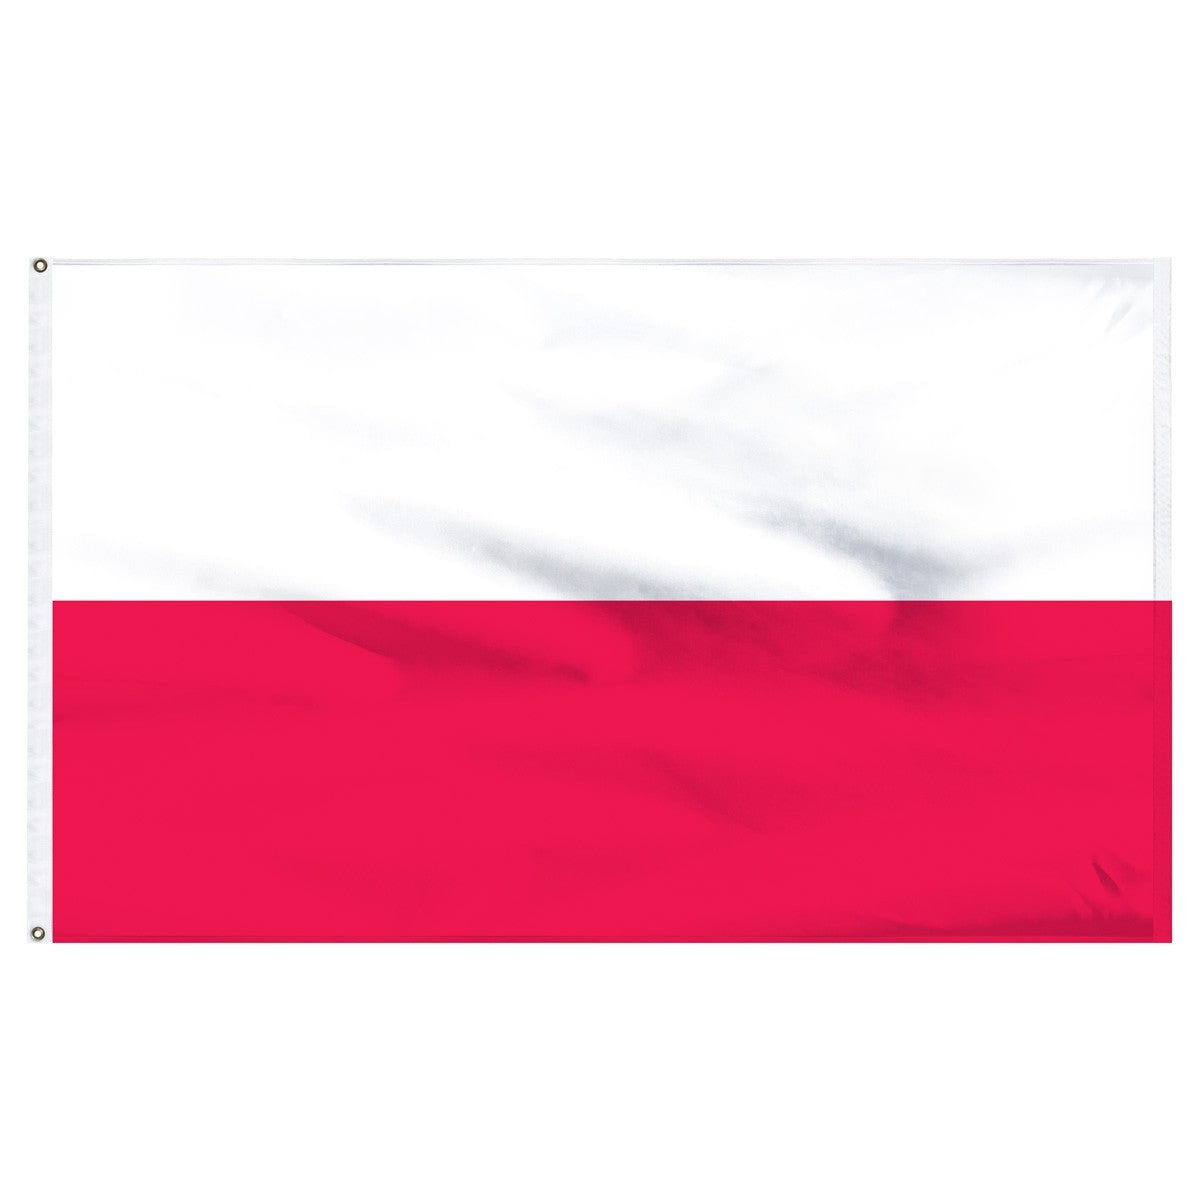 Poland flags for sale